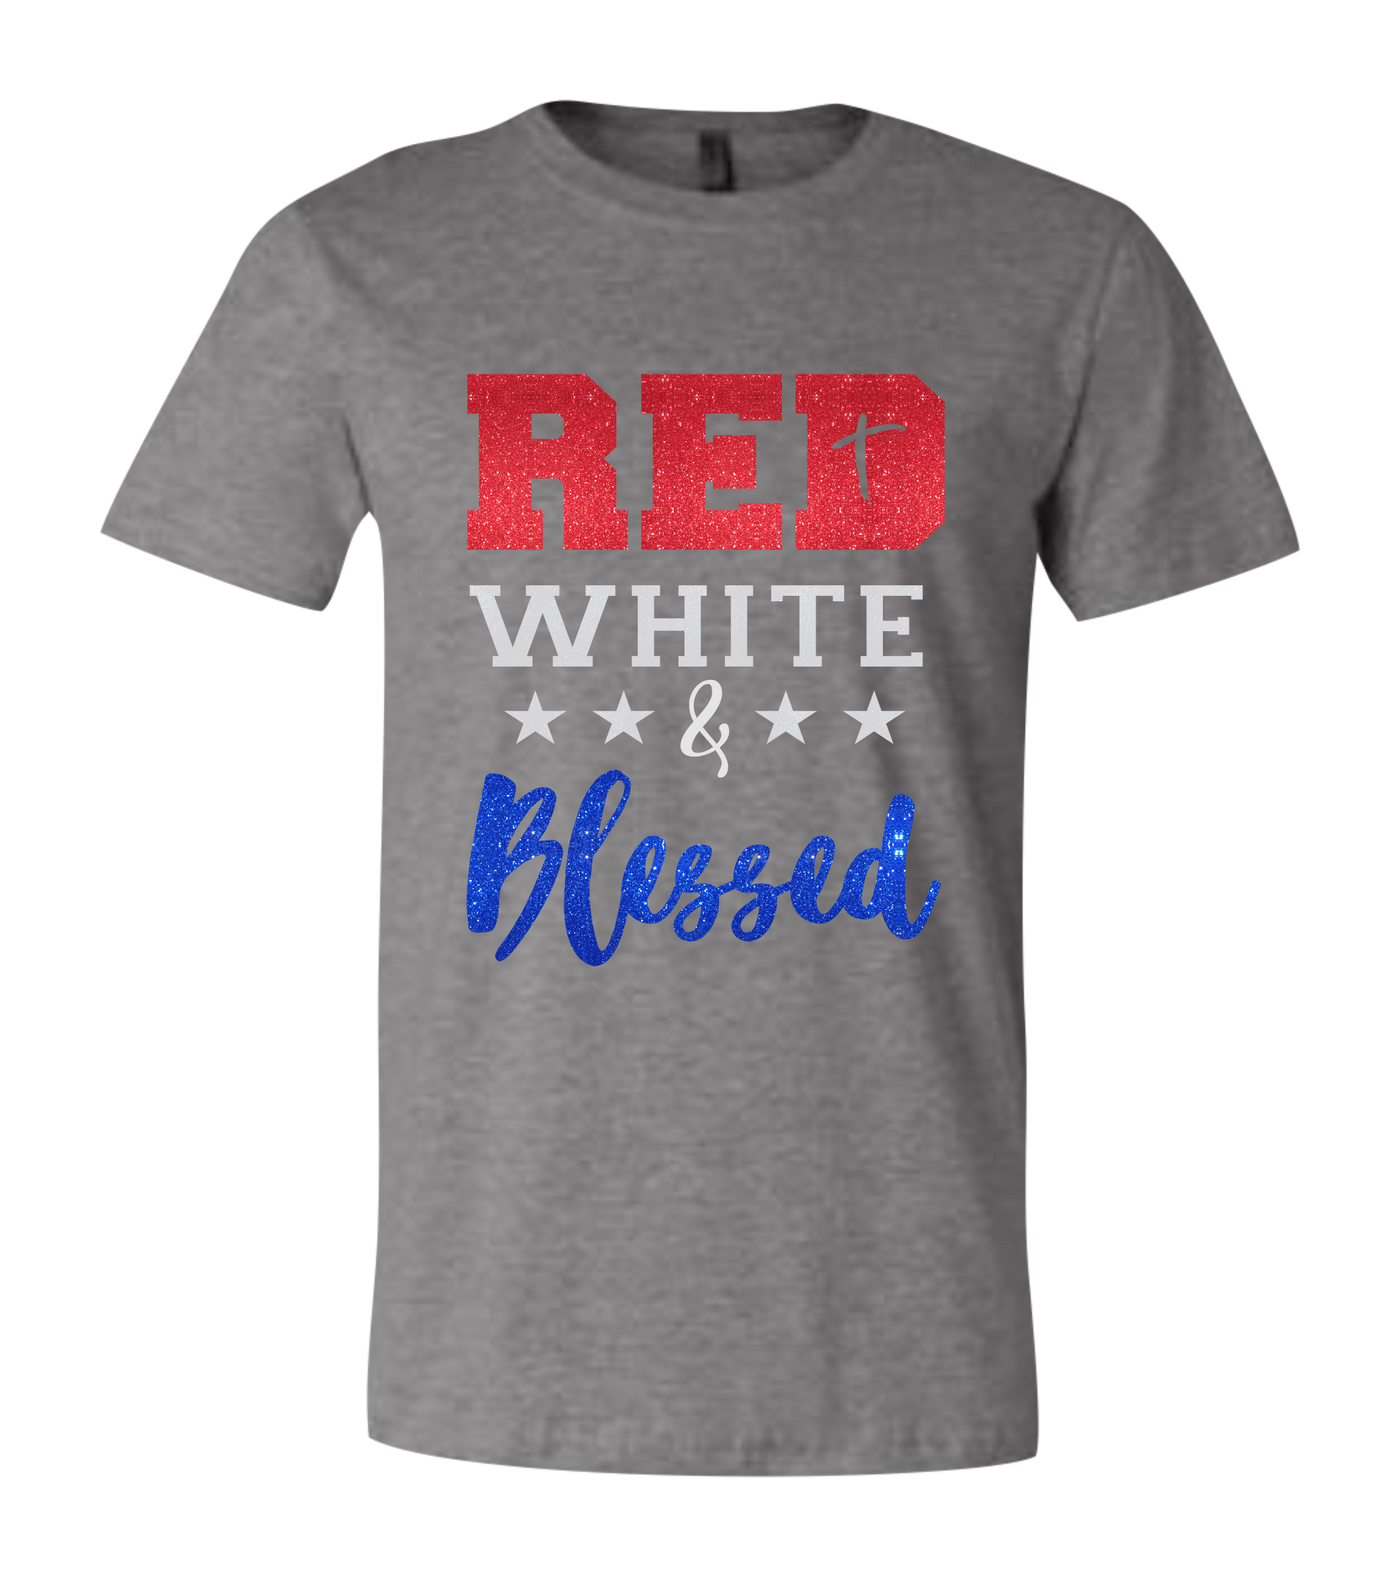 Red White & Blessed Short Sleeve Graphic T-shirt